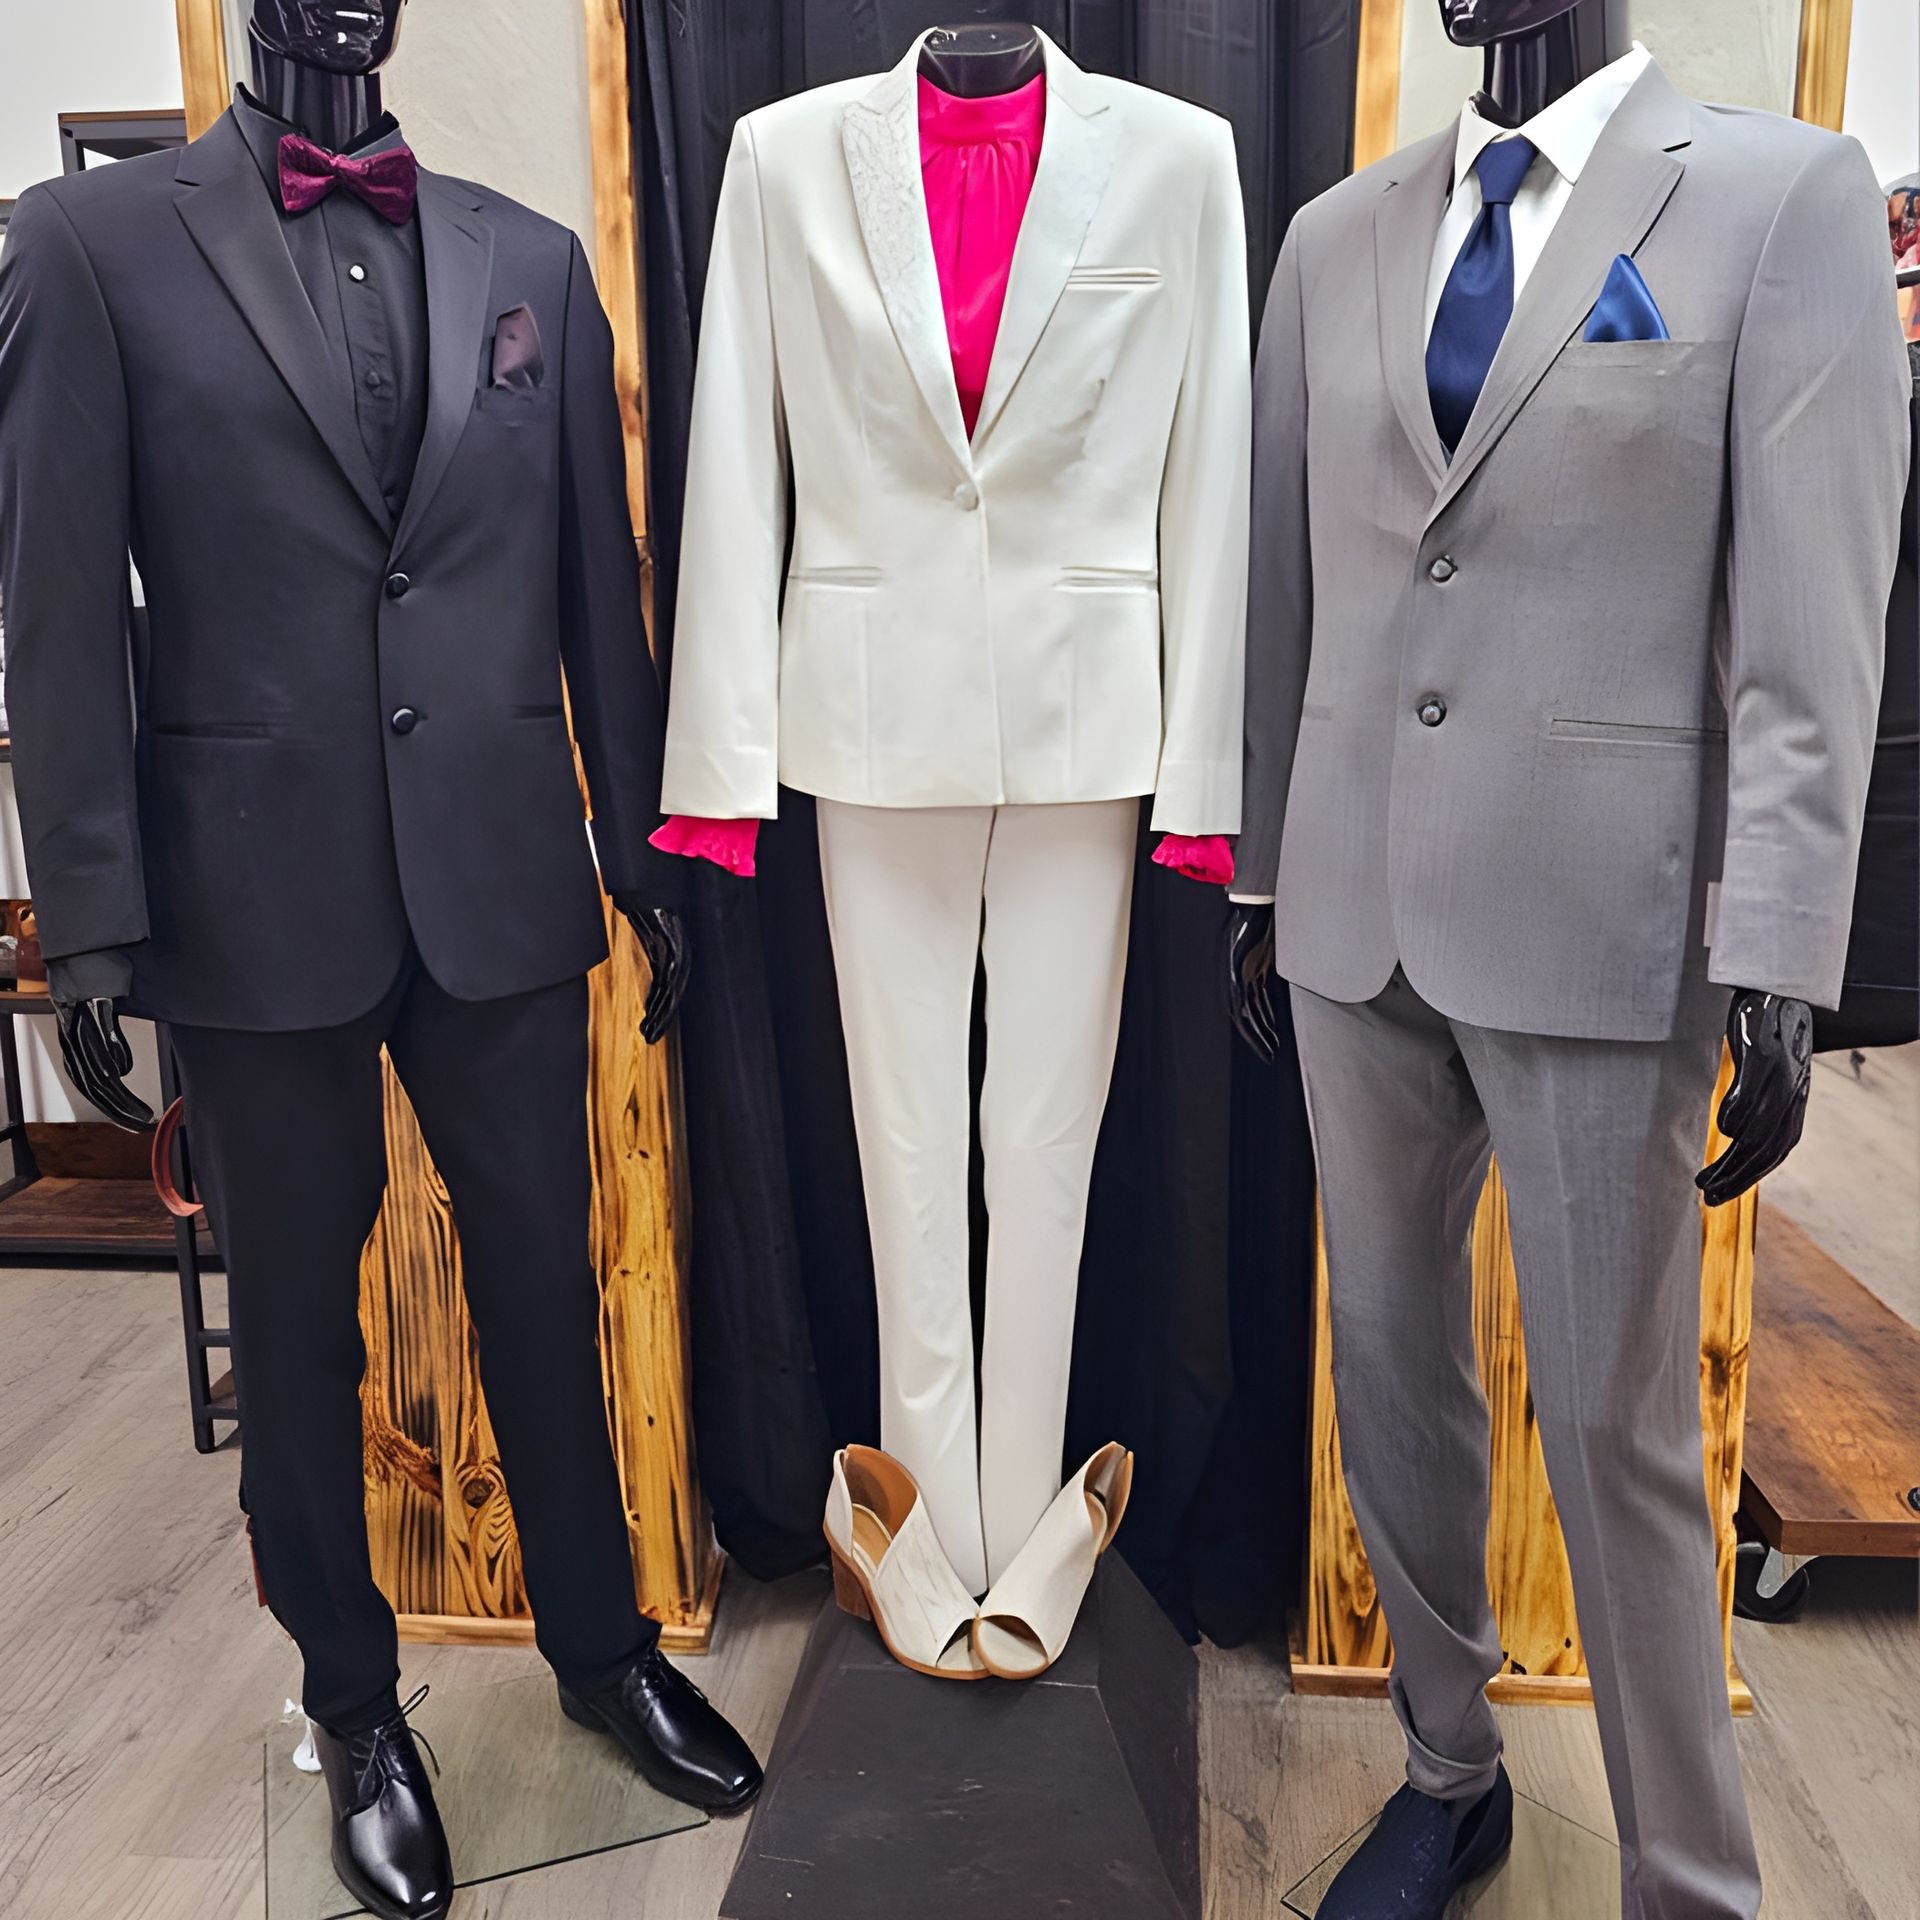 three mannequins wearing suits are standing next to each other